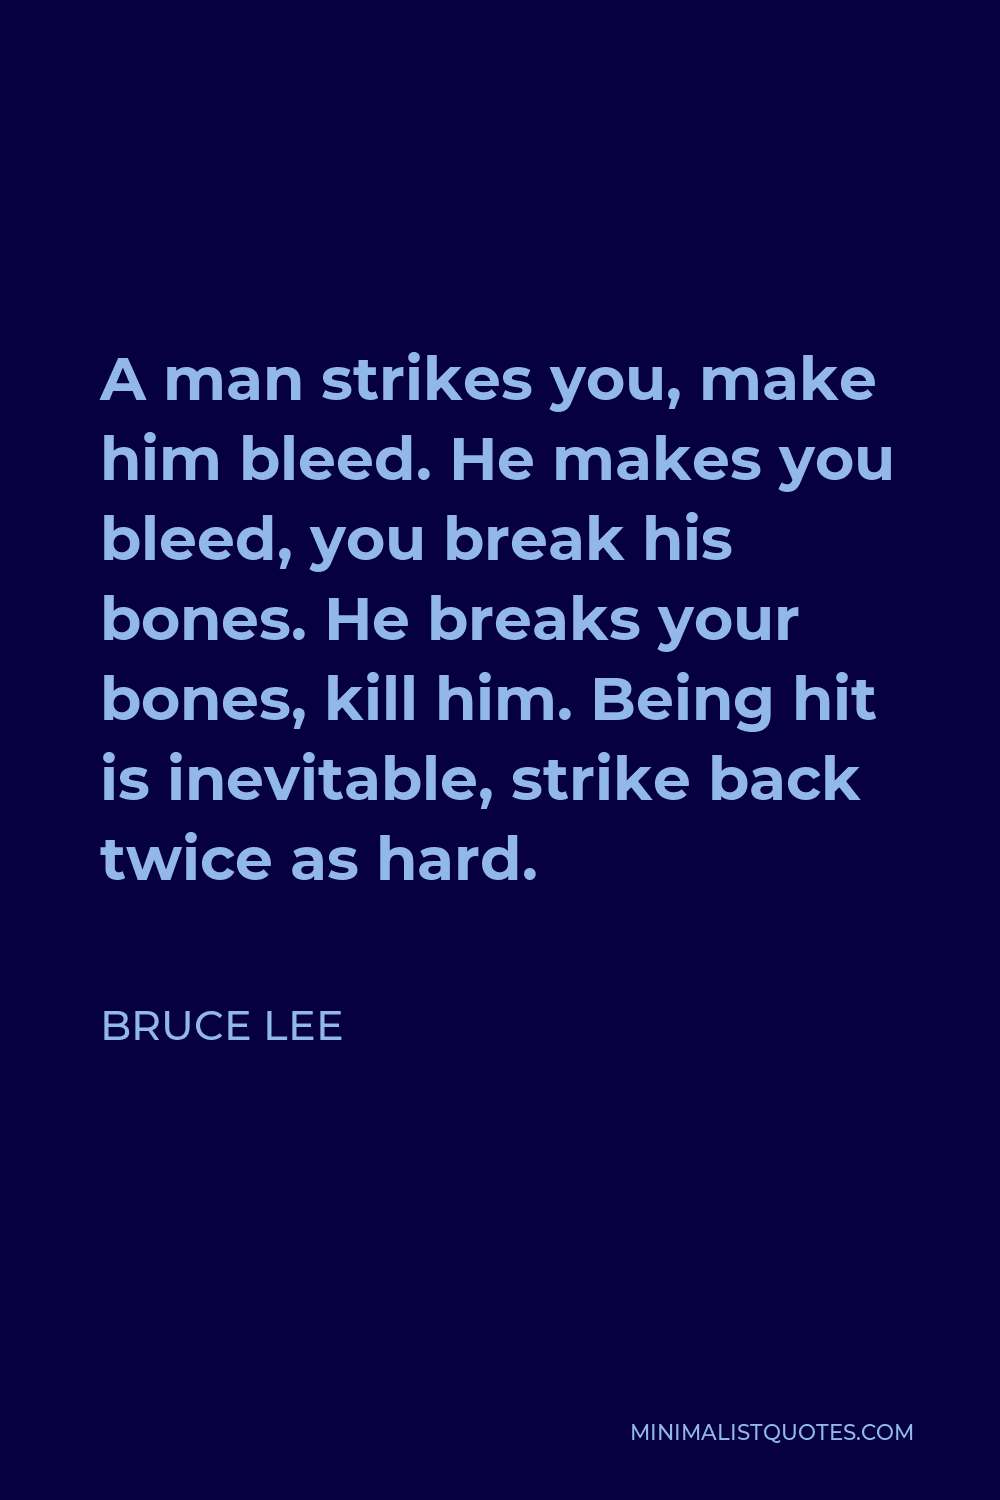 Bruce Lee Quote - A man strikes you, make him bleed. He makes you bleed, you break his bones. He breaks your bones, kill him. Being hit is inevitable, strike back twice as hard.